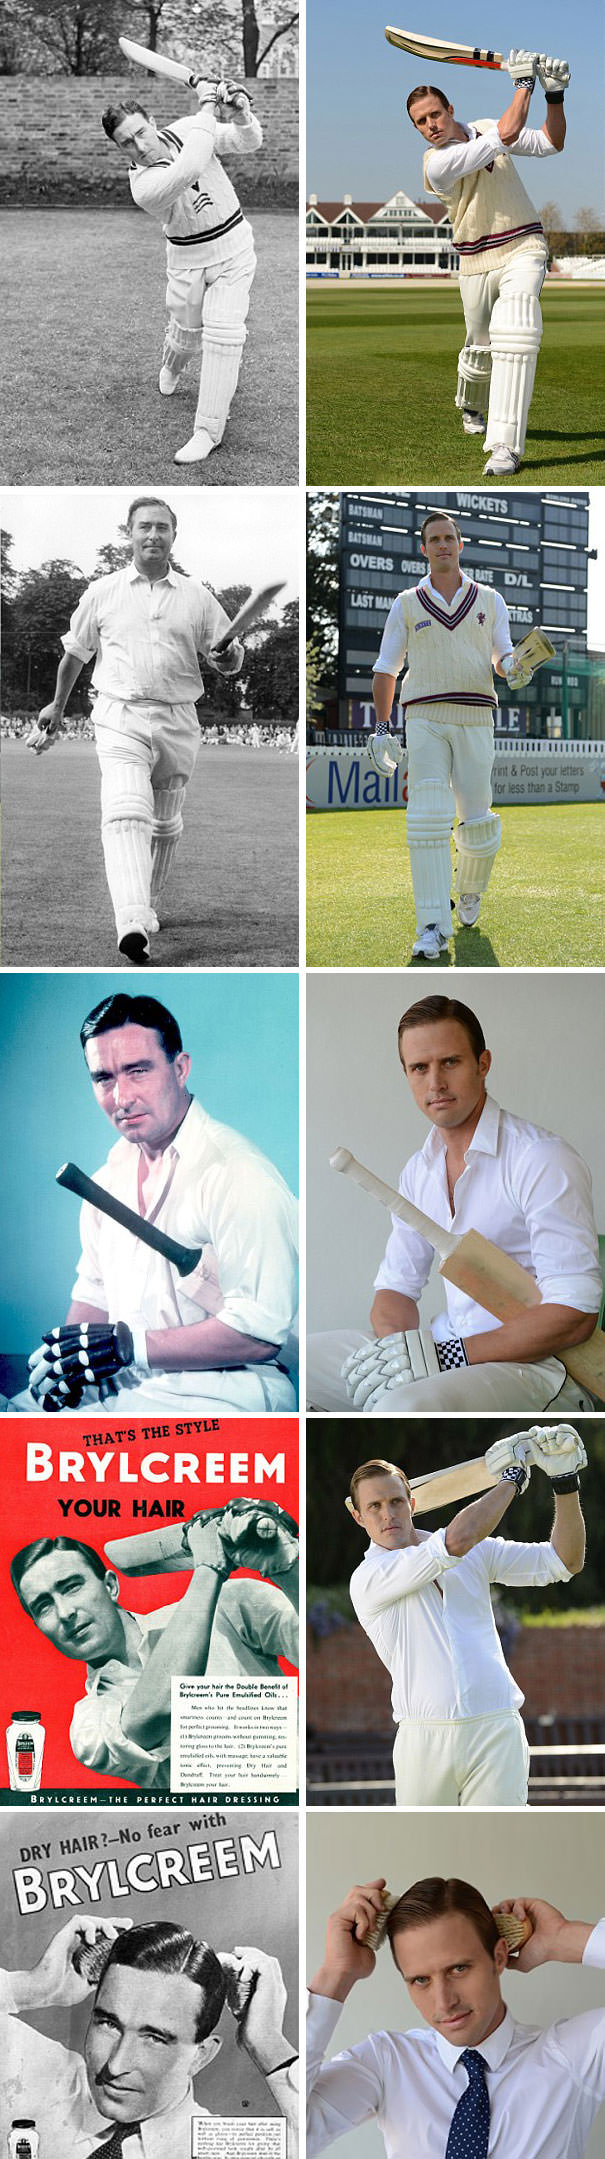 Nick Compton has recreated his grandfather Denis Compton's photos and adverts.